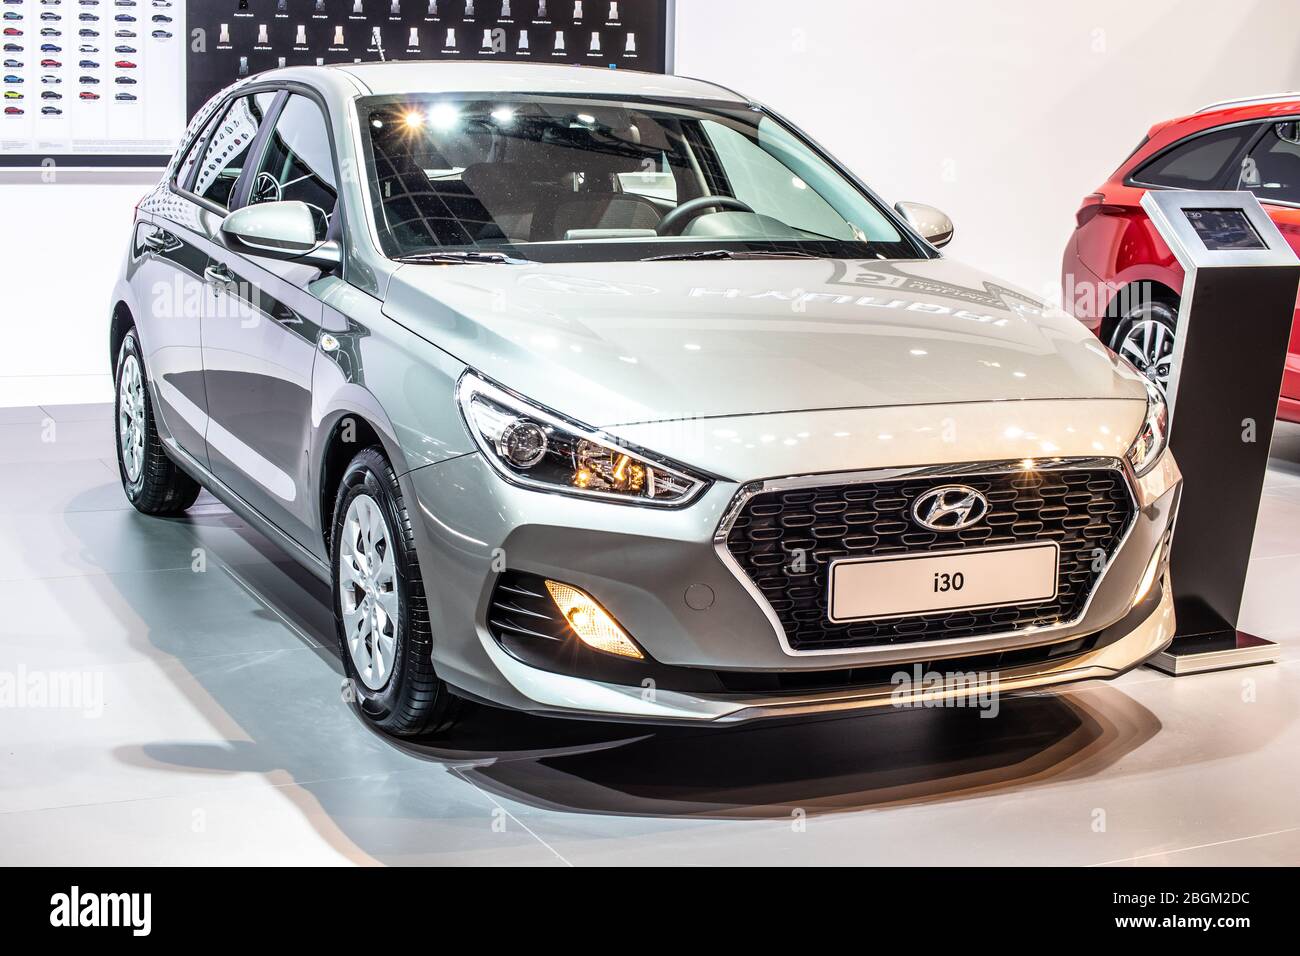 Belgium, Jan 09, 2020: Hyundai i30 at Brussels Show, Third generation, PD, small family car manufactured by Stock Photo Alamy